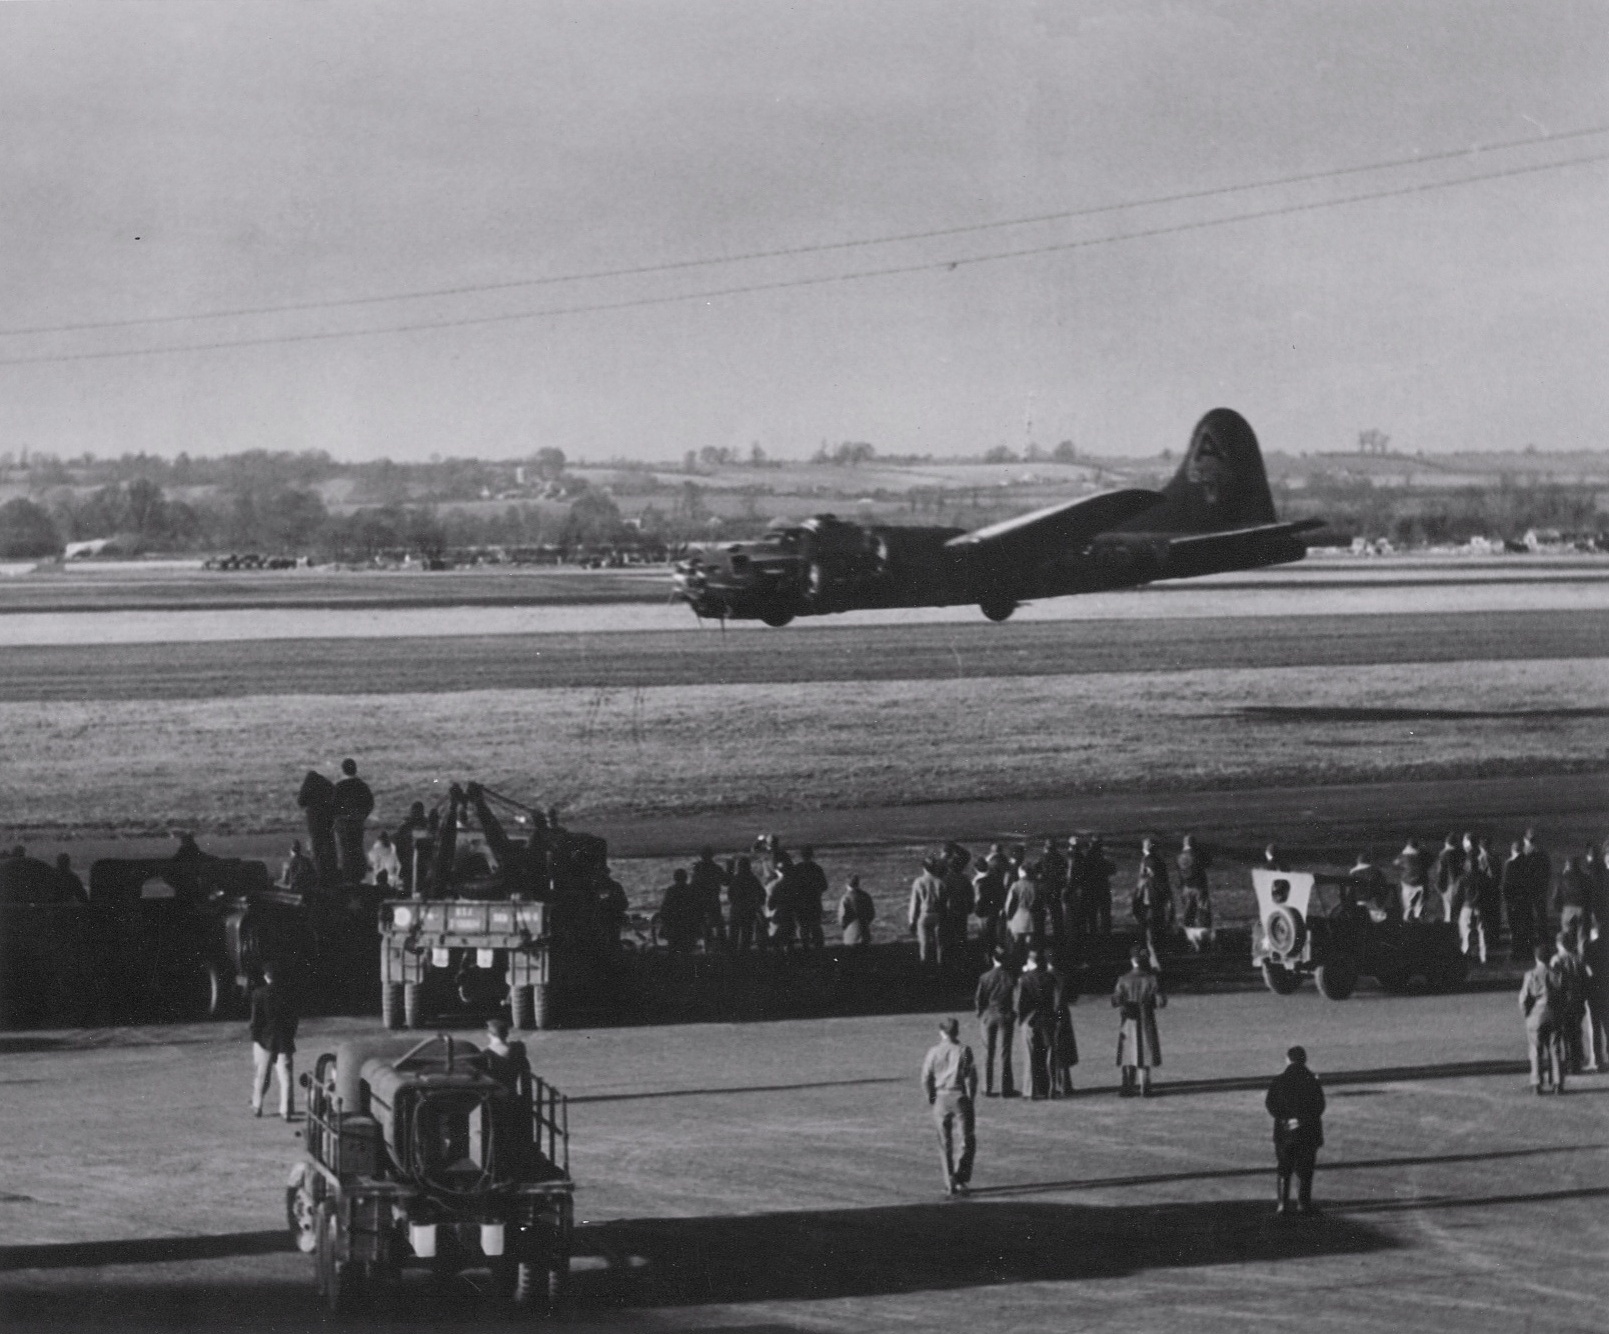 B-17F Fortress aircraft of the 91st BG, 8th Air Force executing a low fly-over during a demonstration at Bassingbourn, England, United Kingdom, 1943, photo 1 of 2